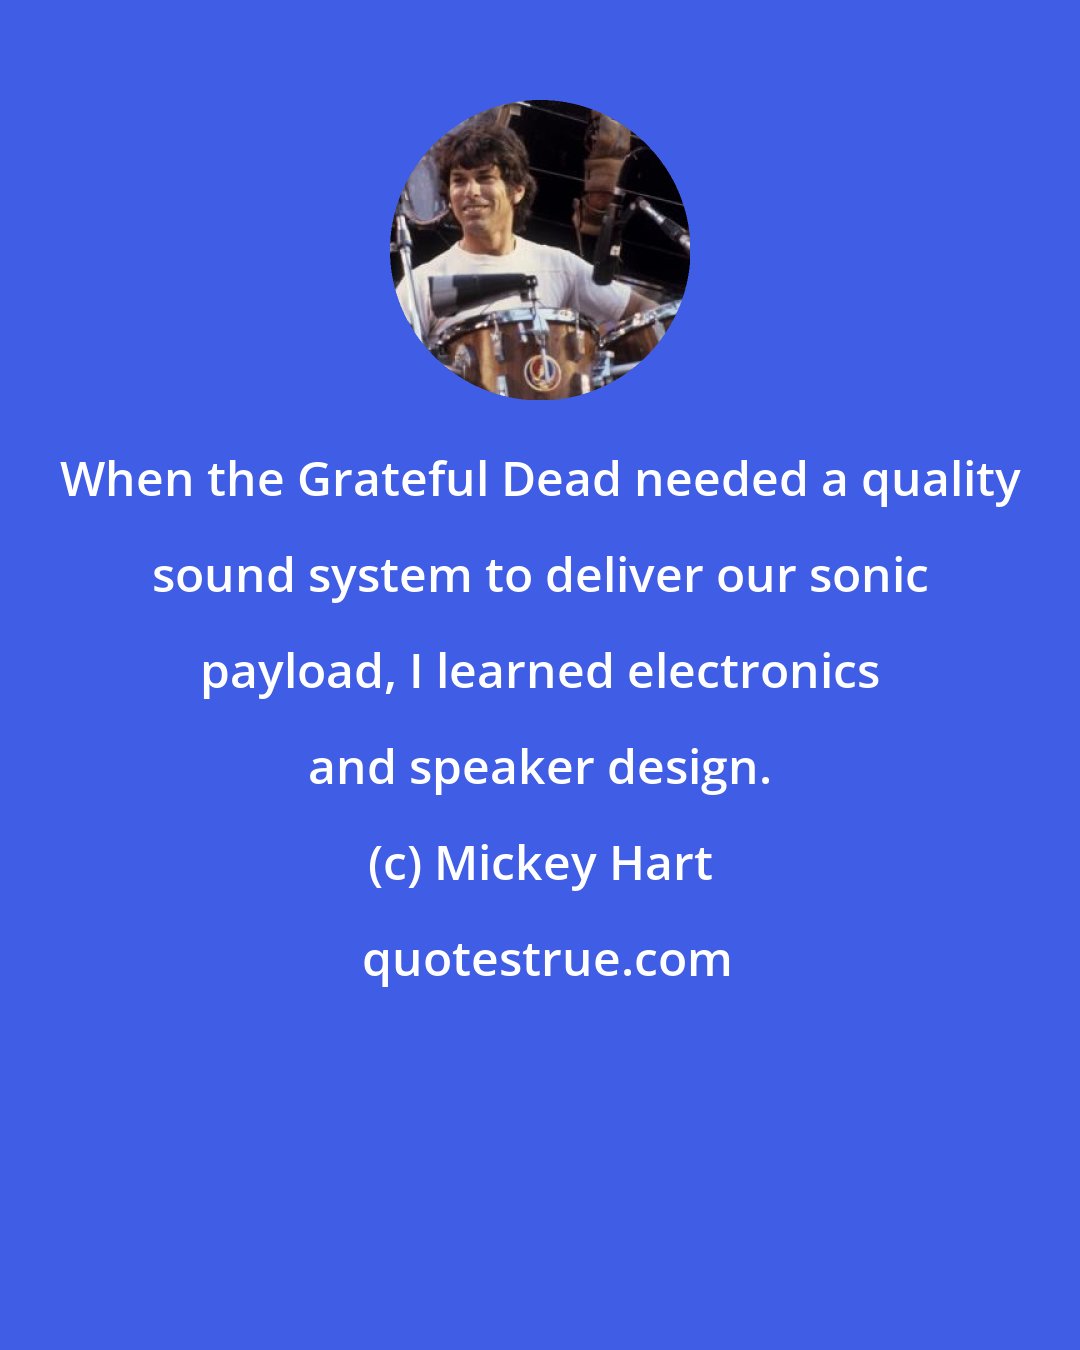 Mickey Hart: When the Grateful Dead needed a quality sound system to deliver our sonic payload, I learned electronics and speaker design.